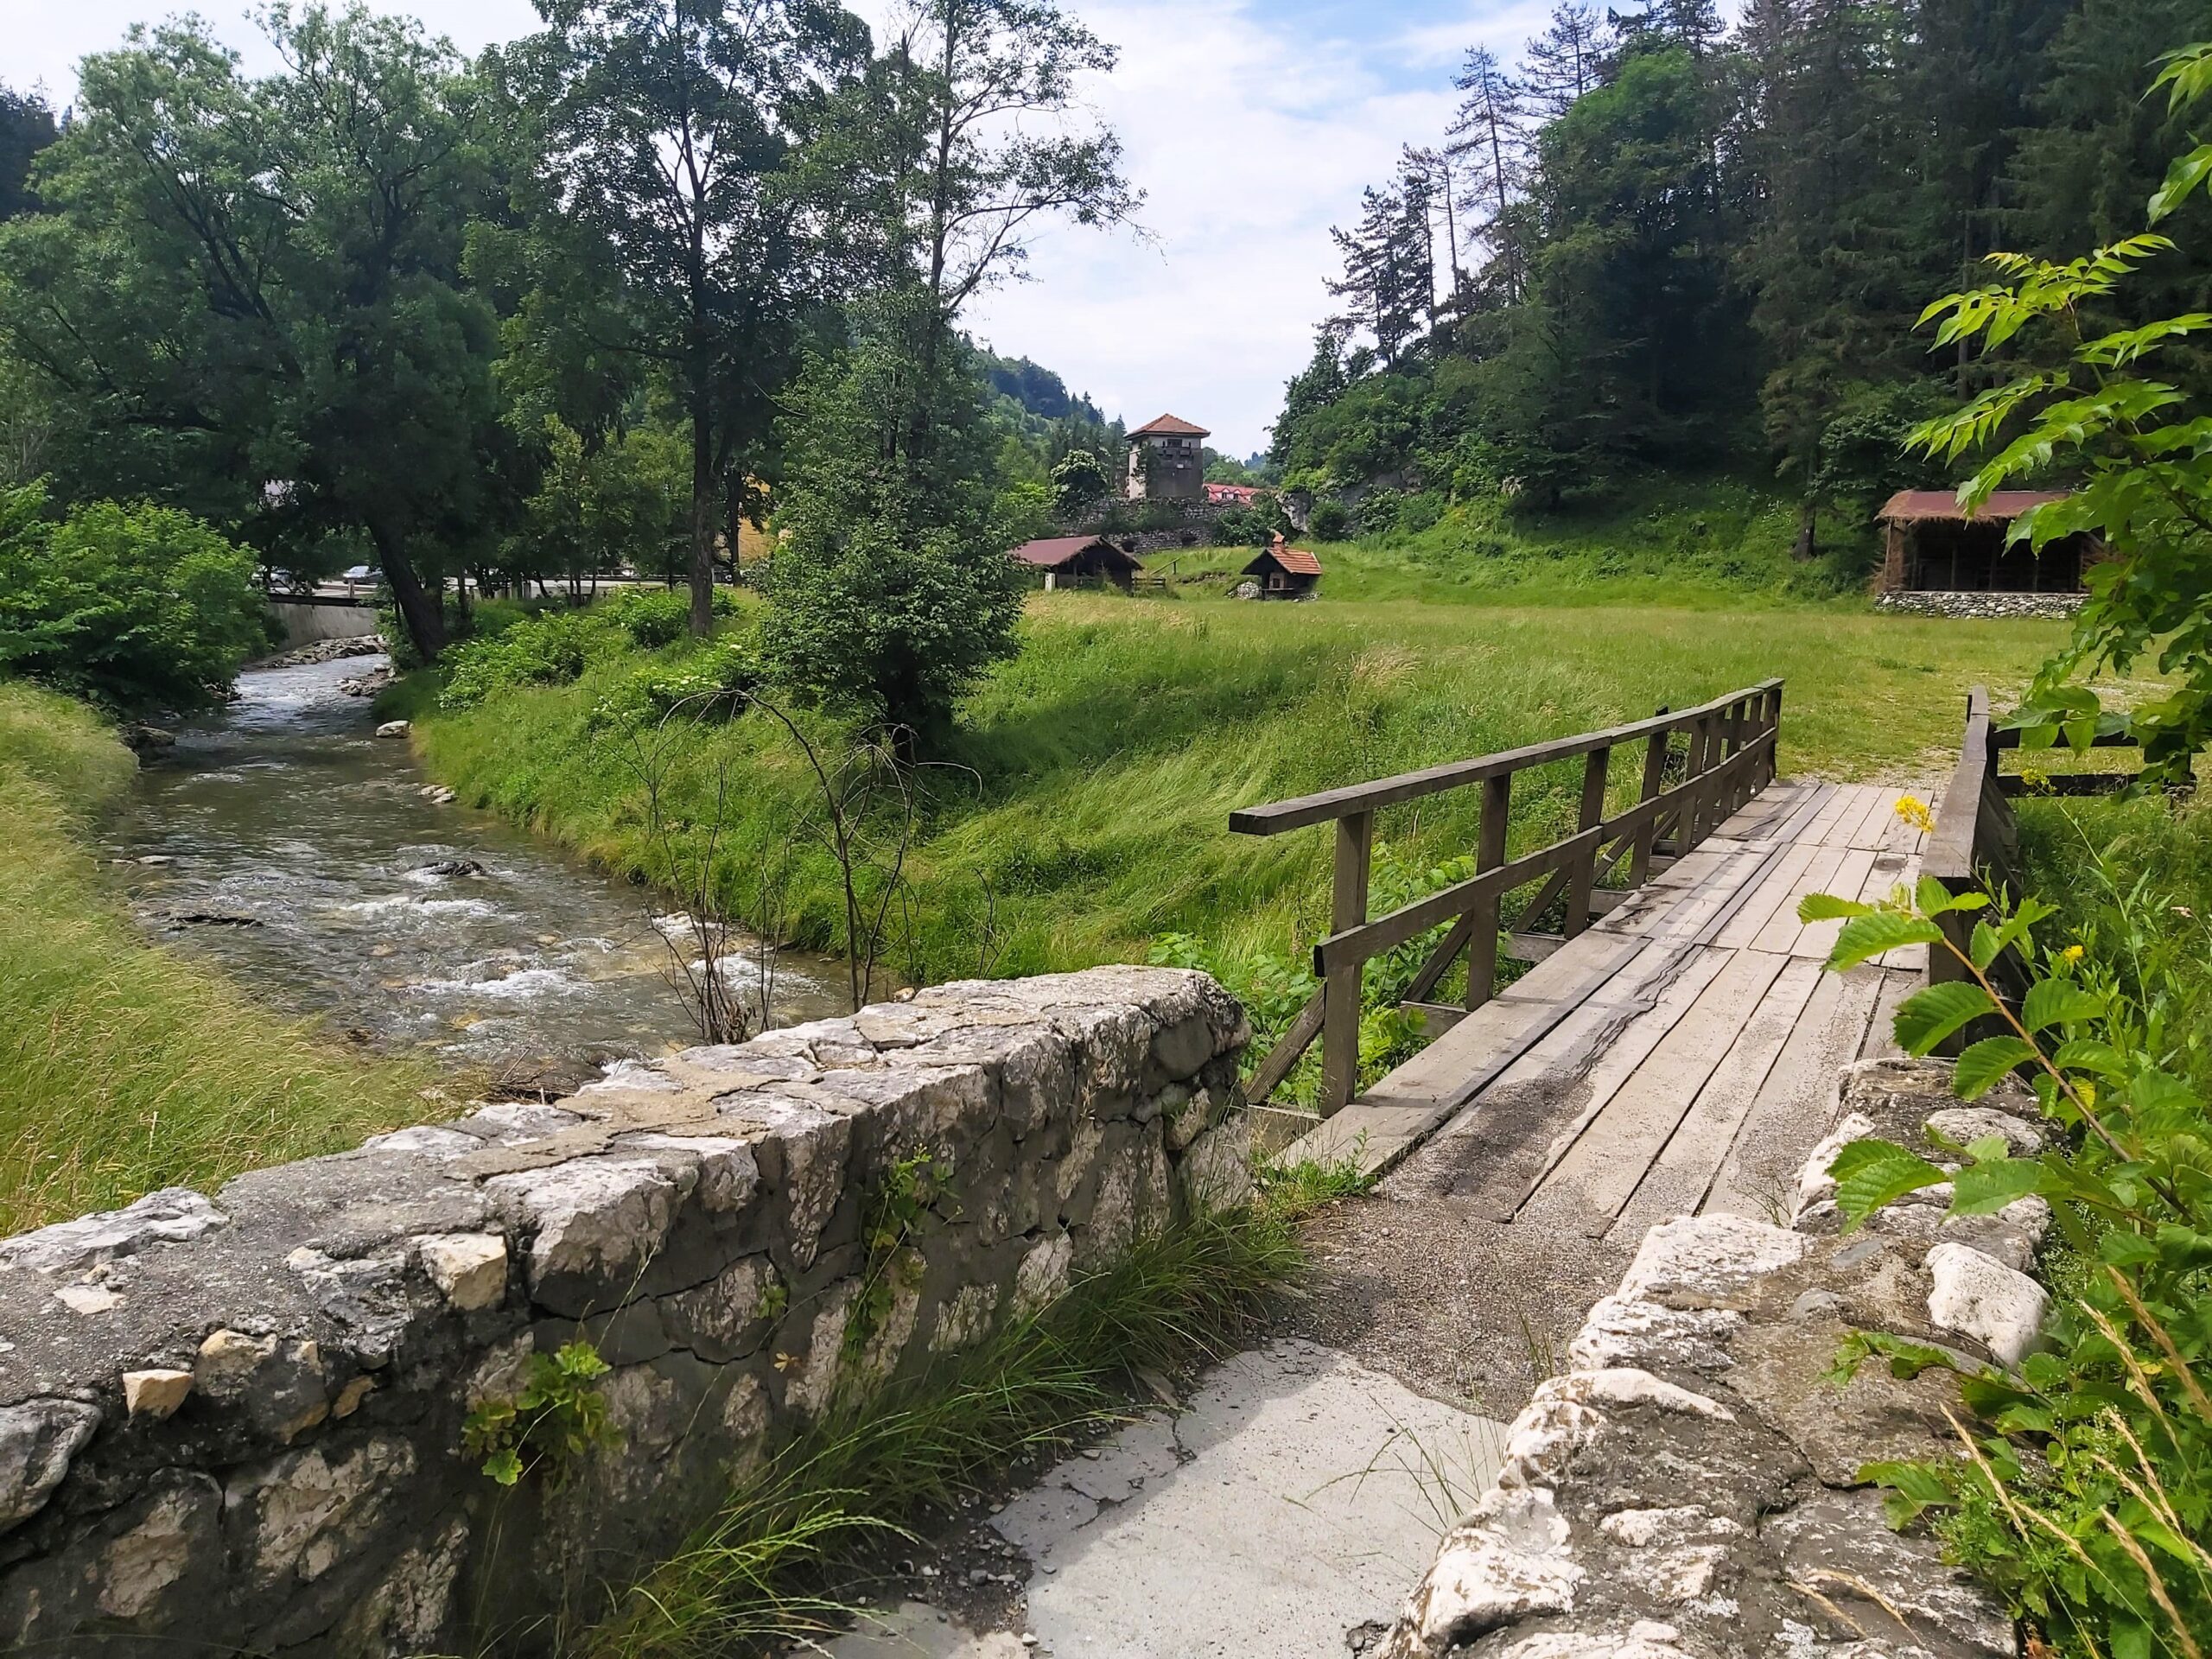 A small footbridge over the river in Bran, Romania. Green trees and green fields all around.